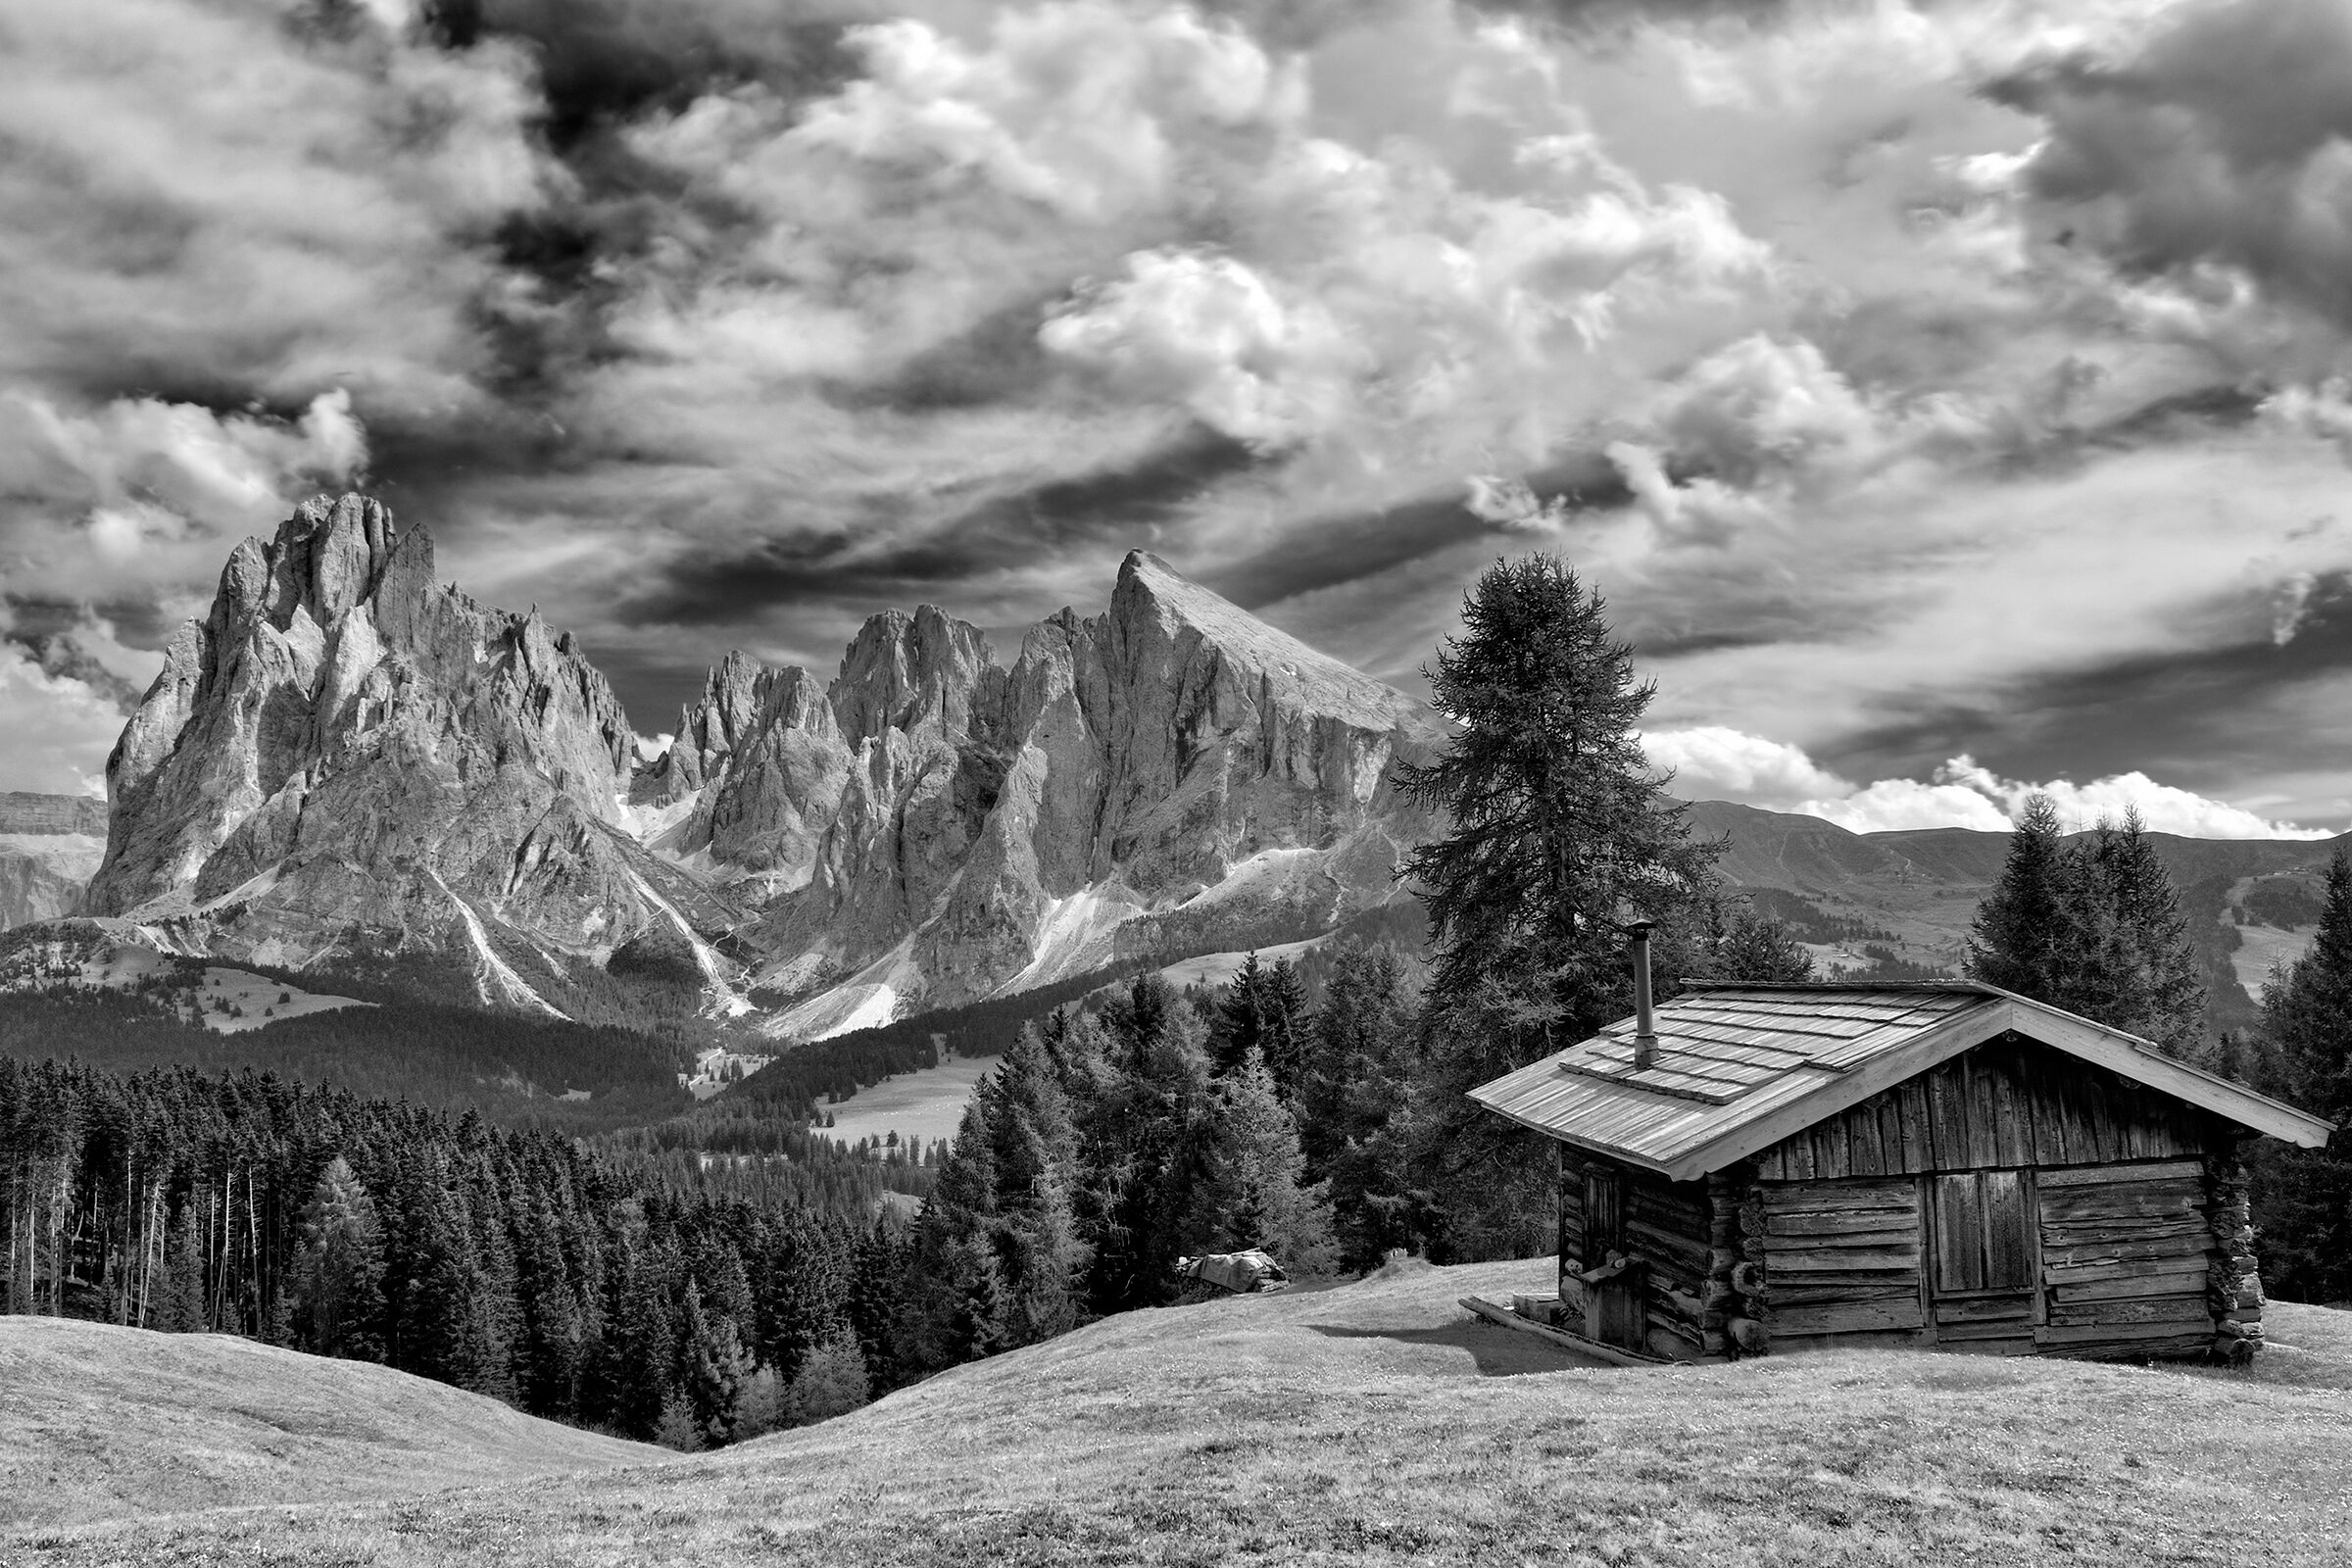 From the Alp of Siusi...